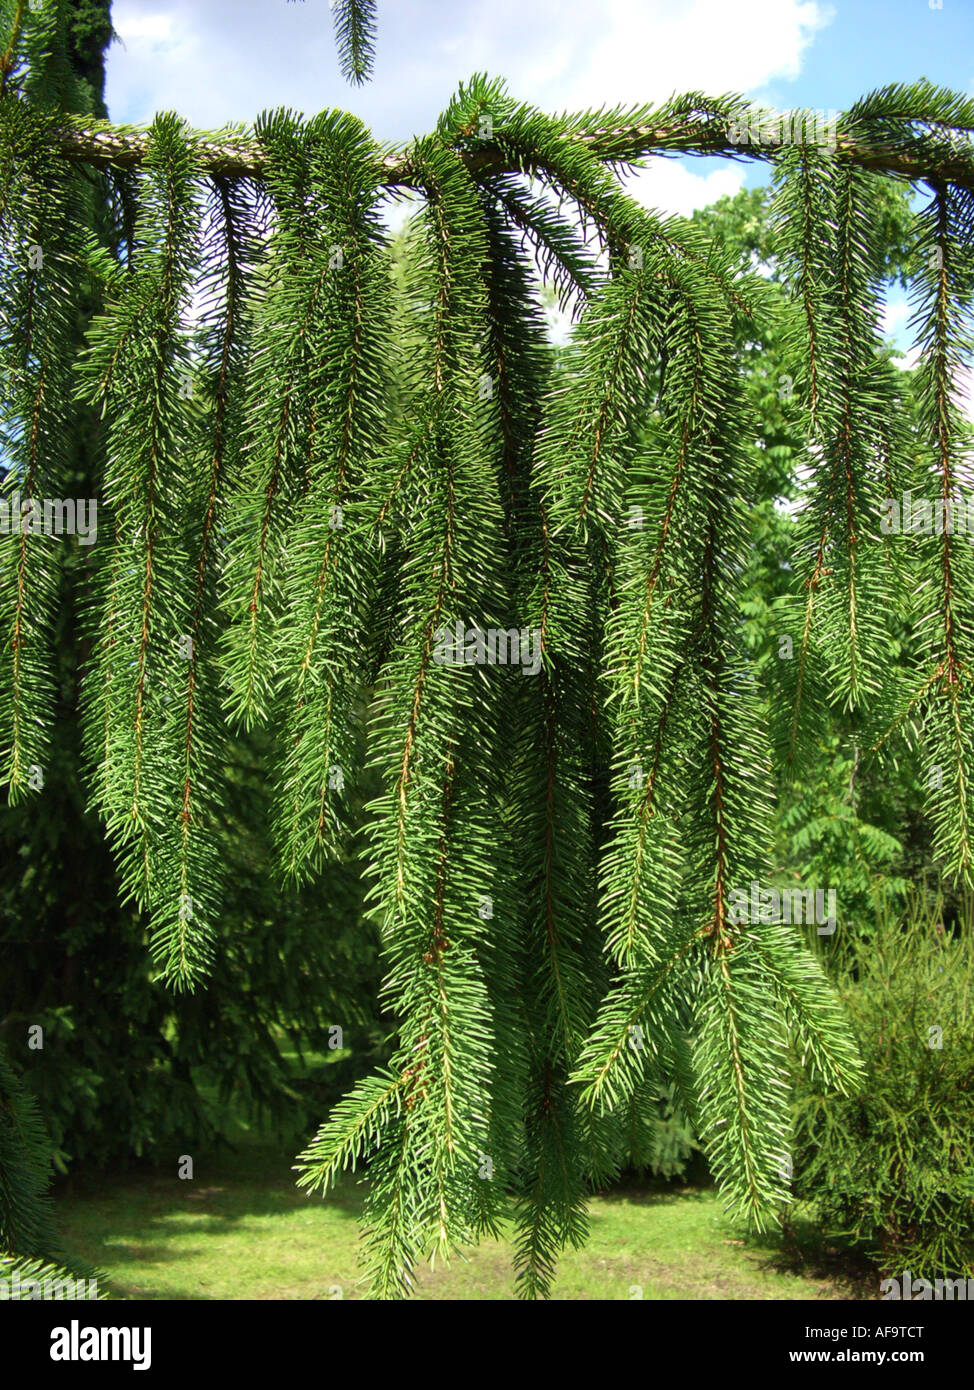 Norway spruce (Picea abies 'Cranstonii', Picea abies Cranstonii), branch Stock Photo